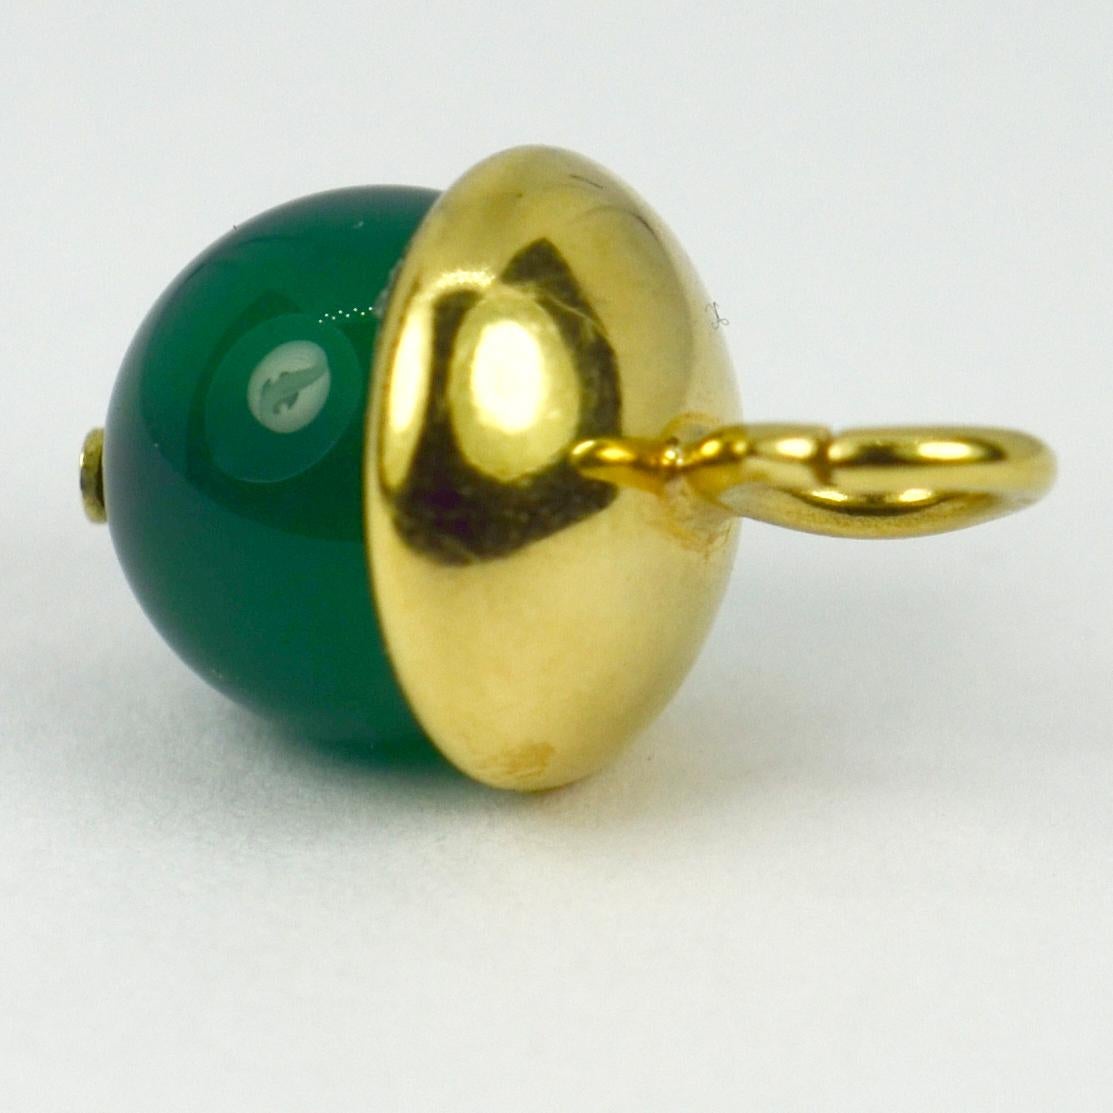 An 18 karat (18K) yellow gold and dyed green agate charm pendant designed as a sphere with gold cap. Stamped with the owl punch mark for 18 karat gold and French import.

Dimensions: 2 x 1.2 x 1.2 cm
Weight: 2.59 grams
